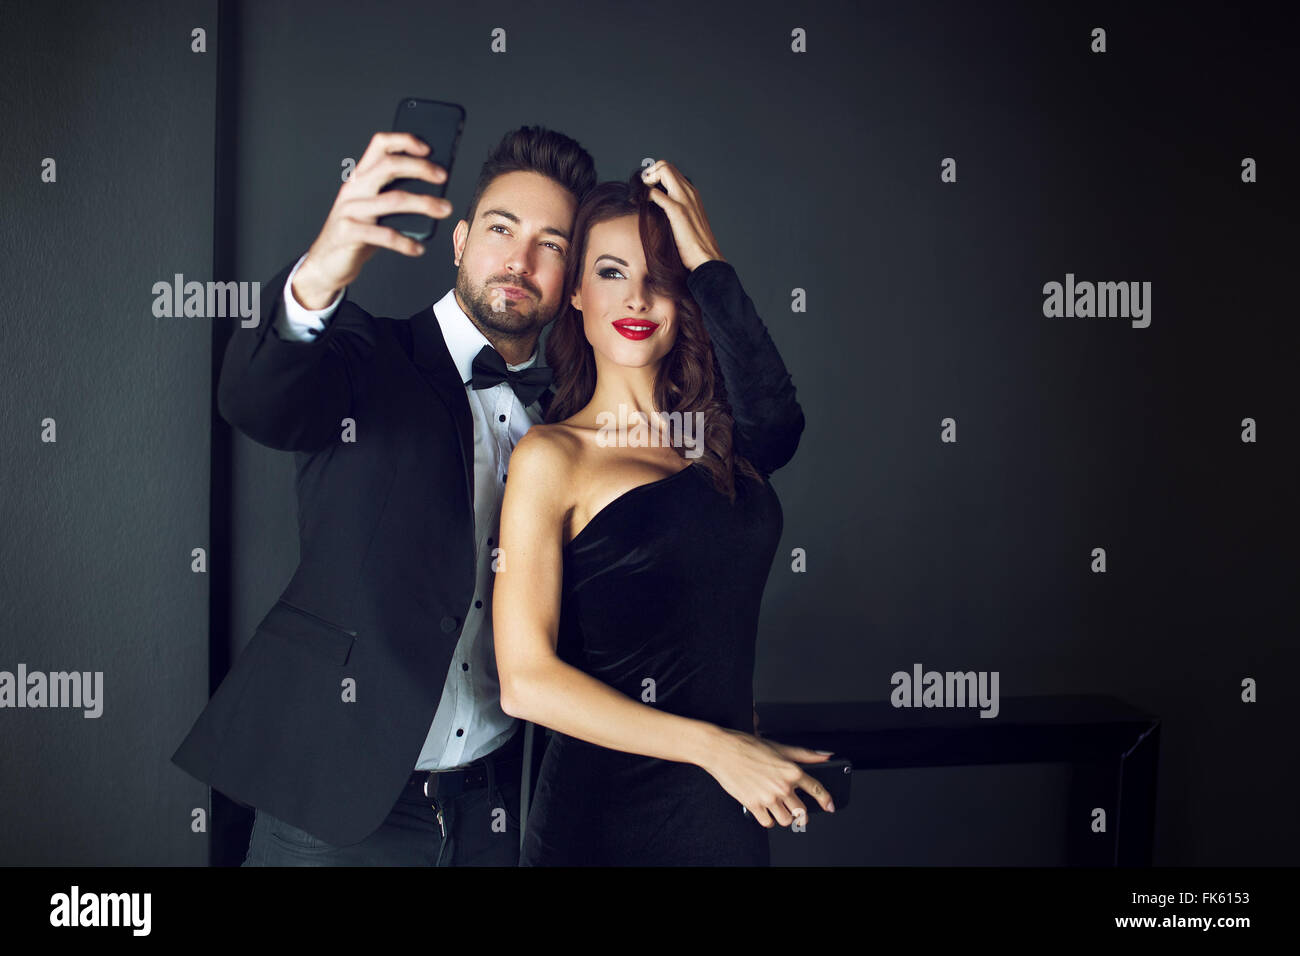 Fashionable rich celebrity couple taking selfie indoor Stock Photo